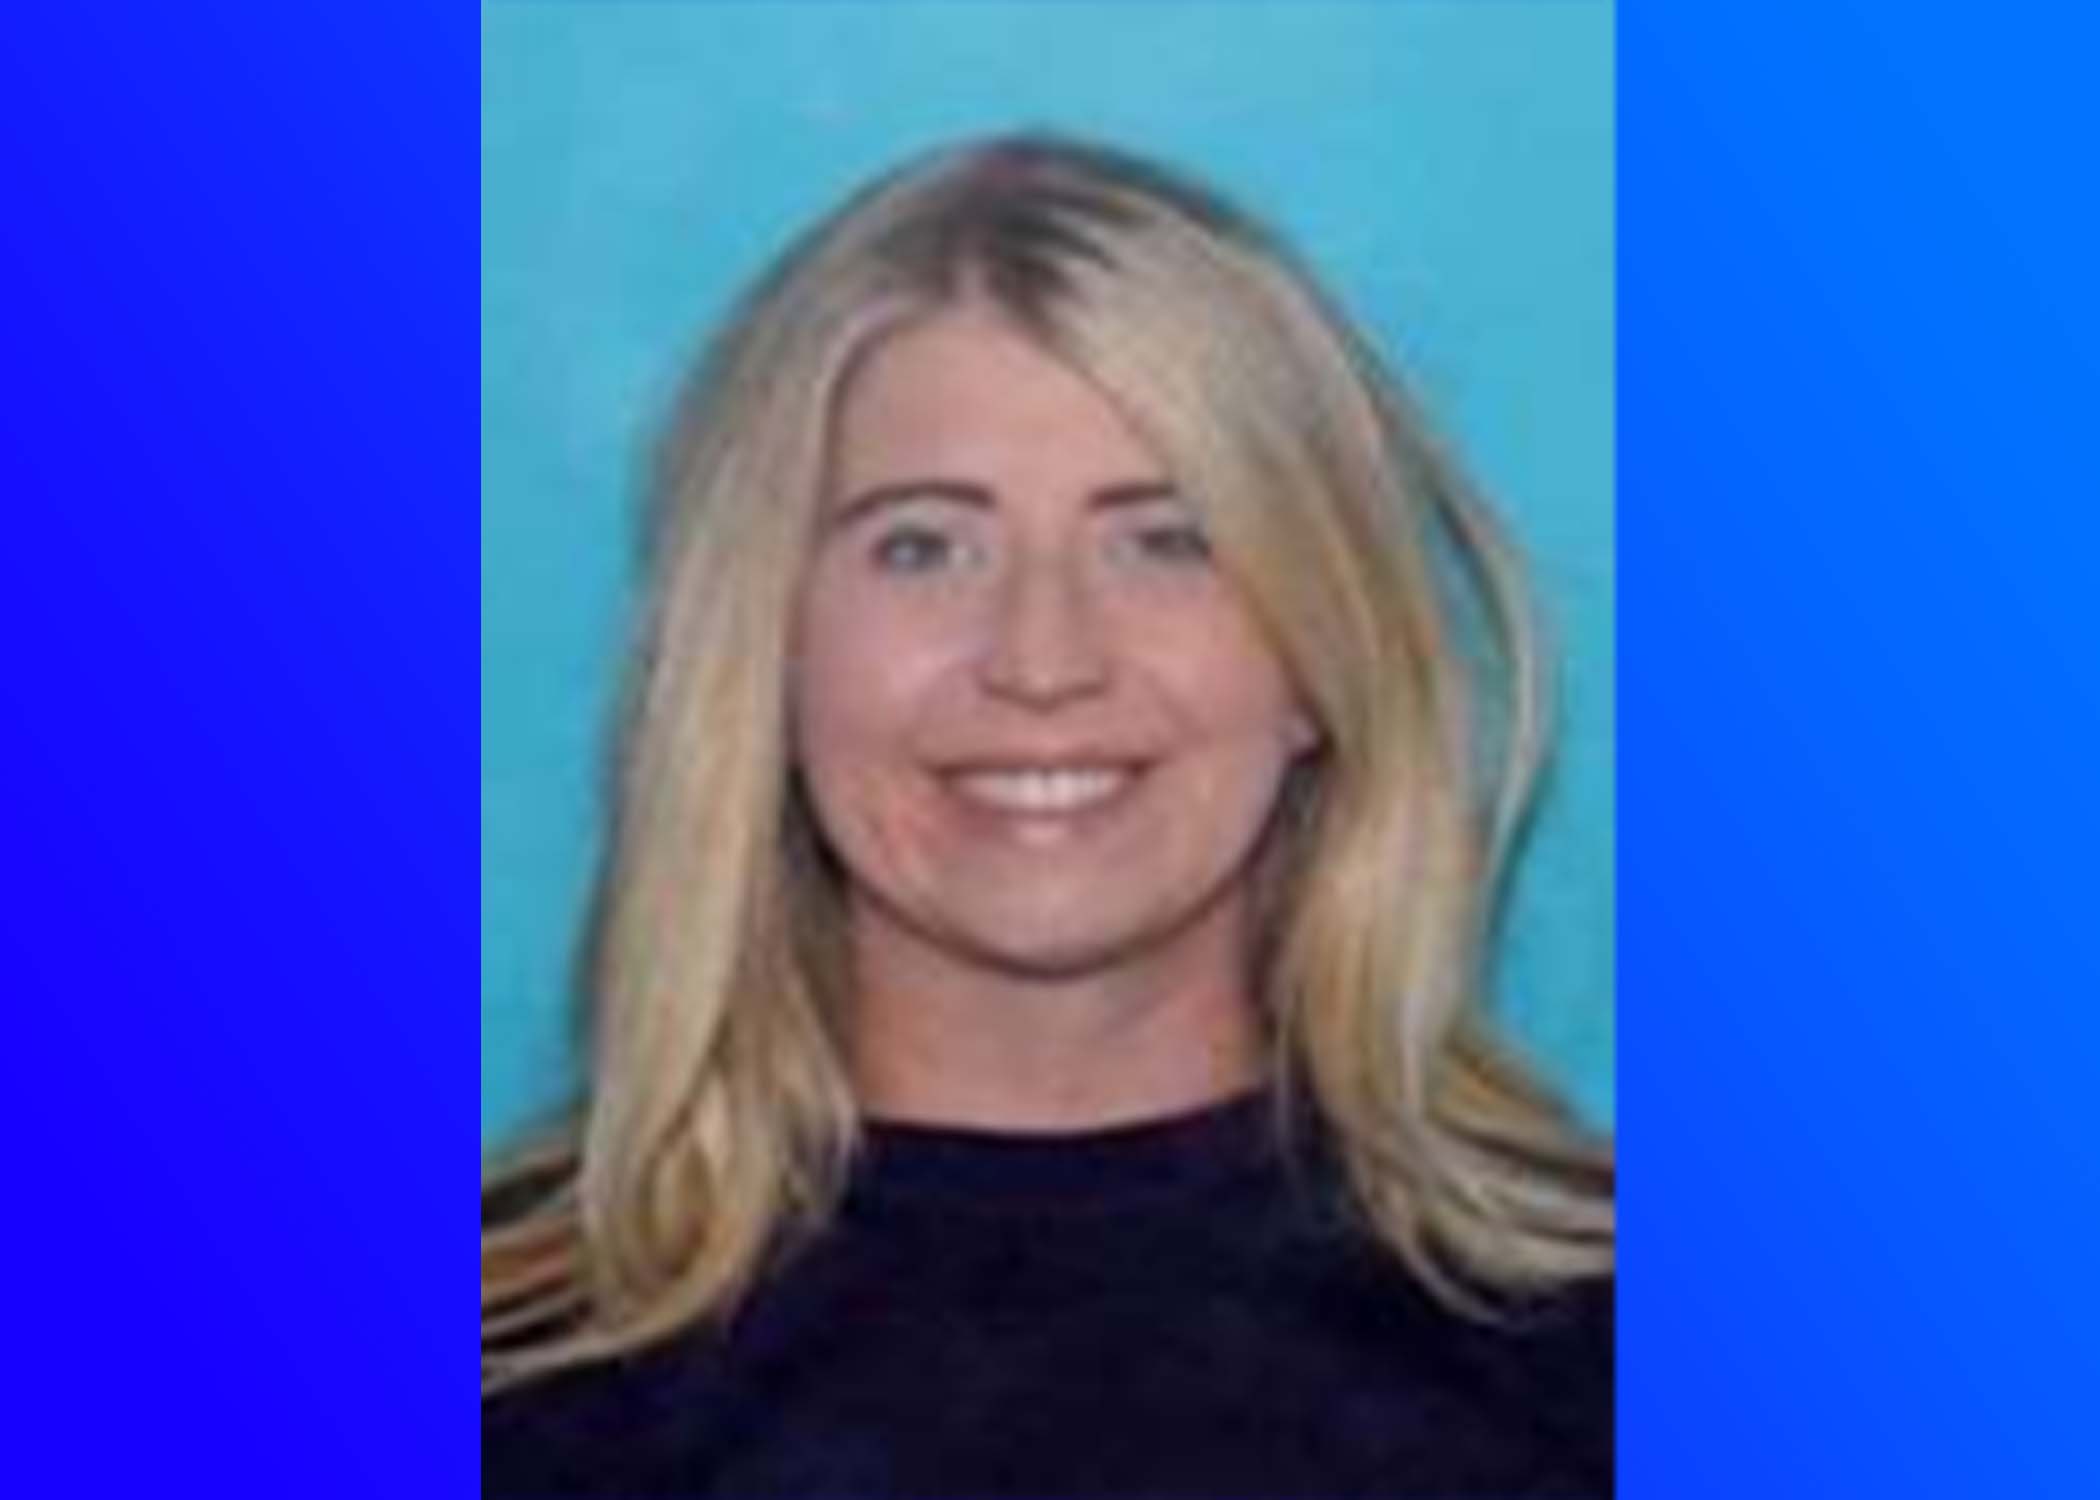 Missing and Endangered Person Alert issued for Franklin County woman